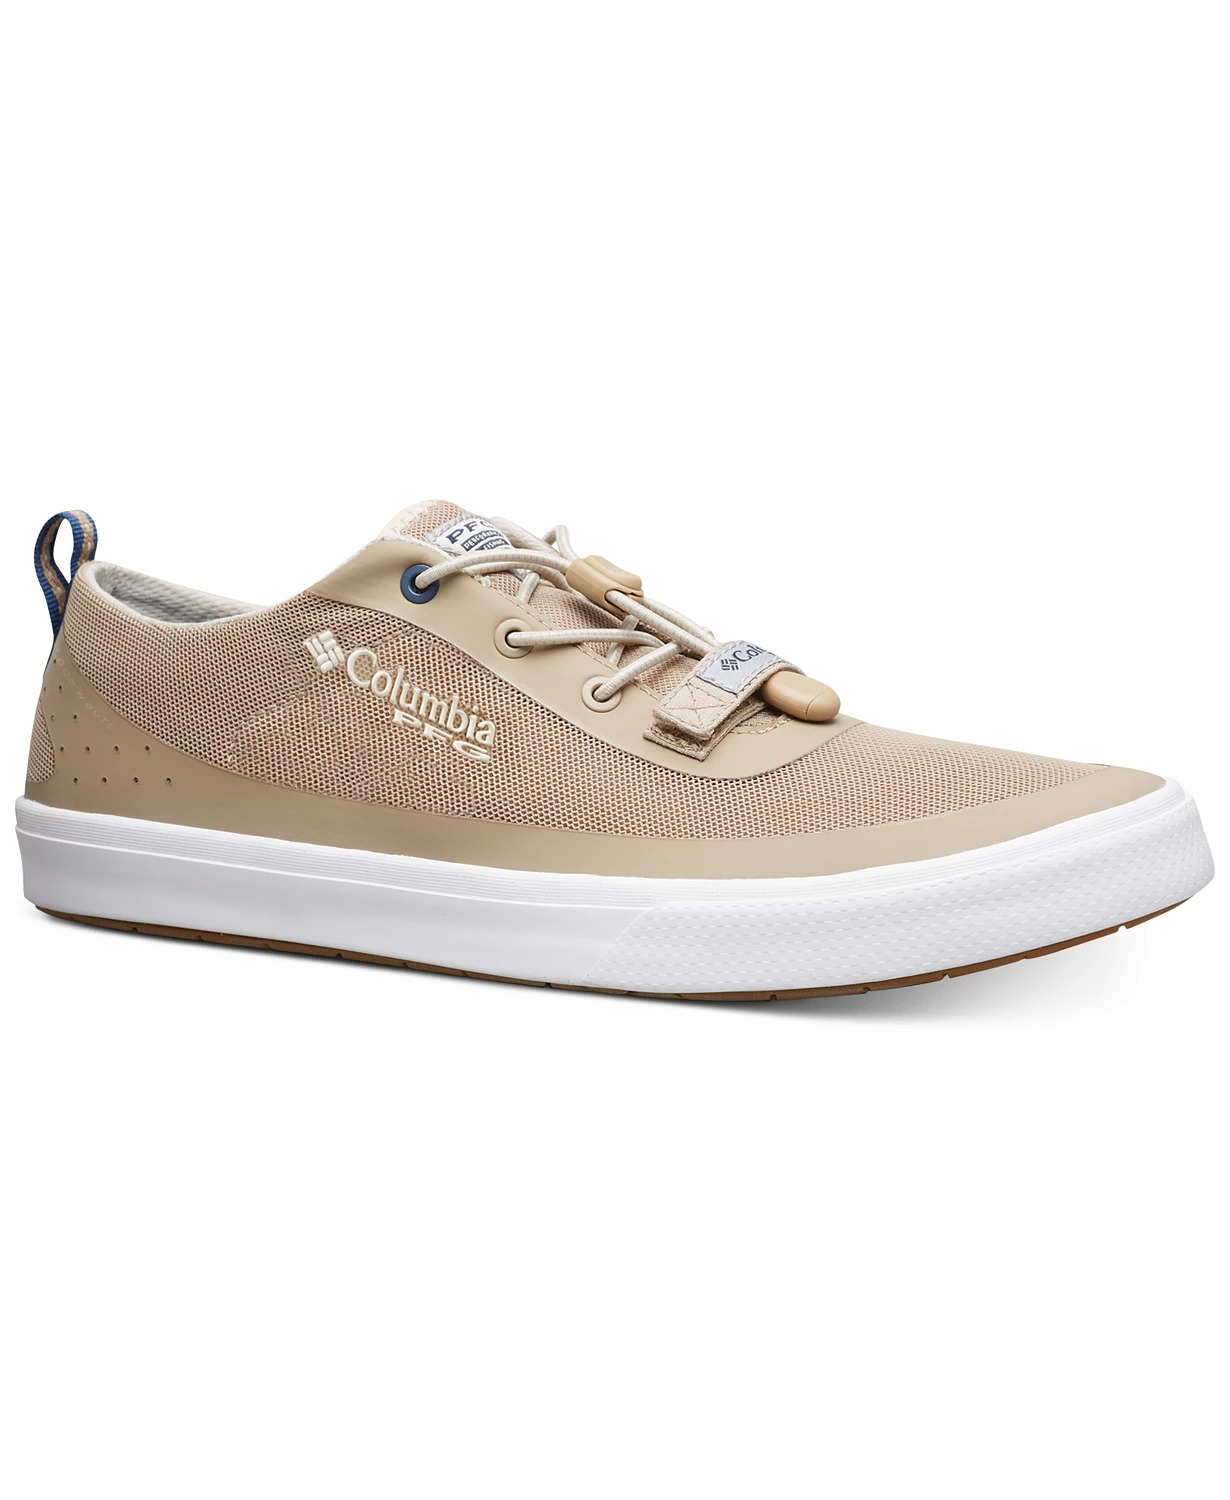 Columbia Men's Dorado CVO PFG Sneakers $35, Sun + Stone Men's Baker Faux-Leather Lace-Up Boots $21 + SD Cashback + Free Store Pickup at Macy's or FS on $25+